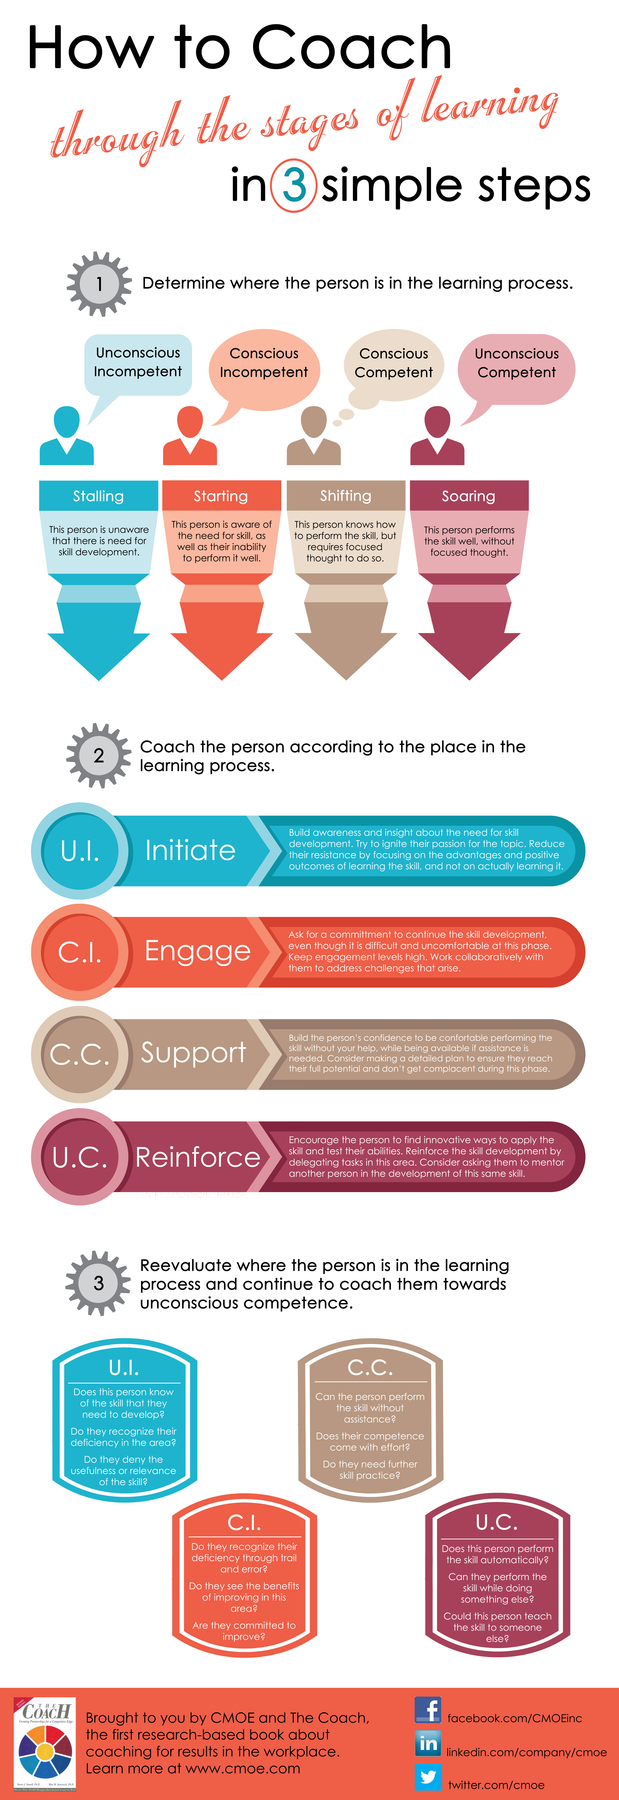 How to coach through the stages of learning infographic - CMOE